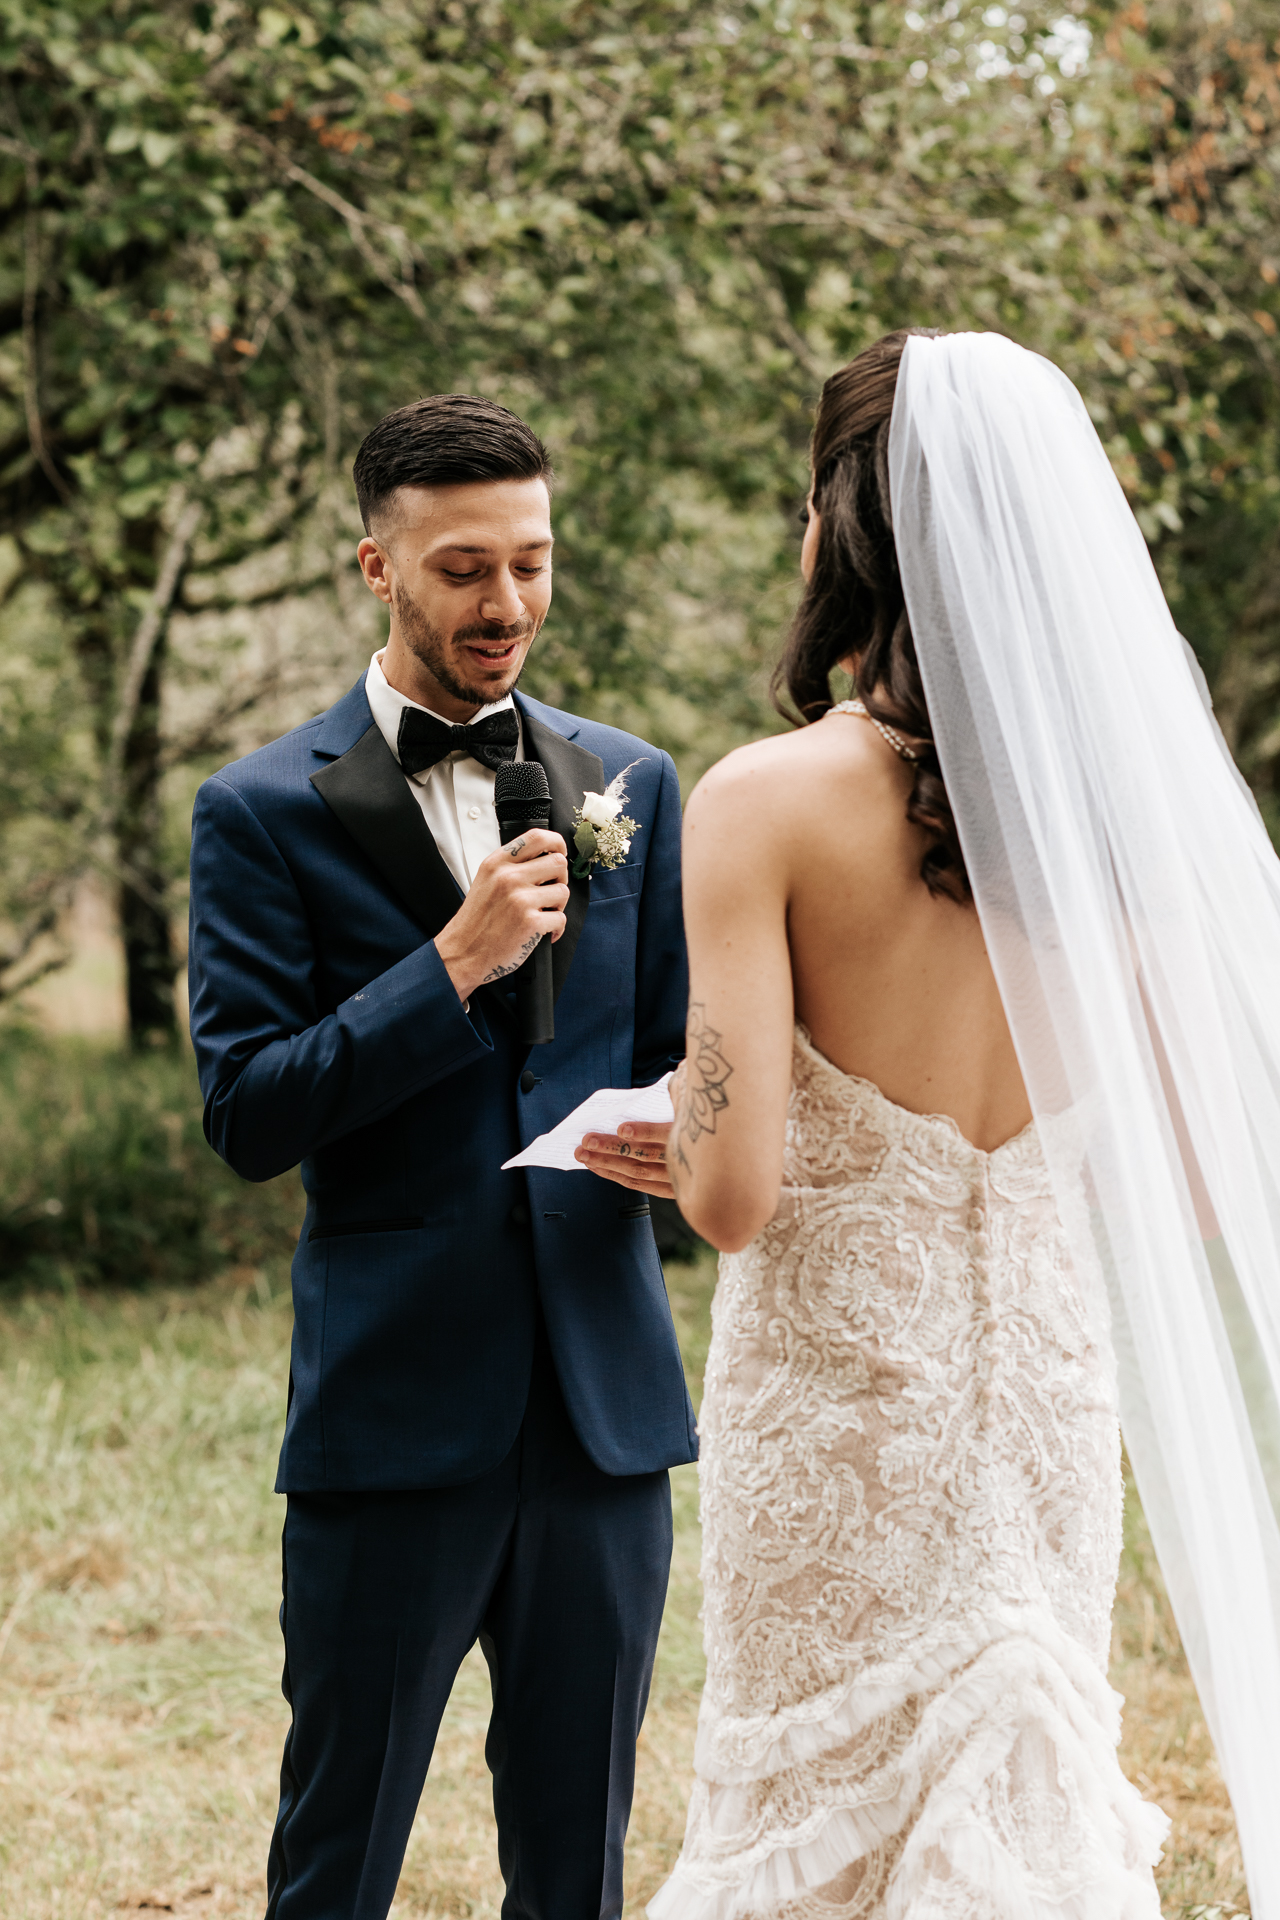 Groom reading his vows at their wedding ceremony